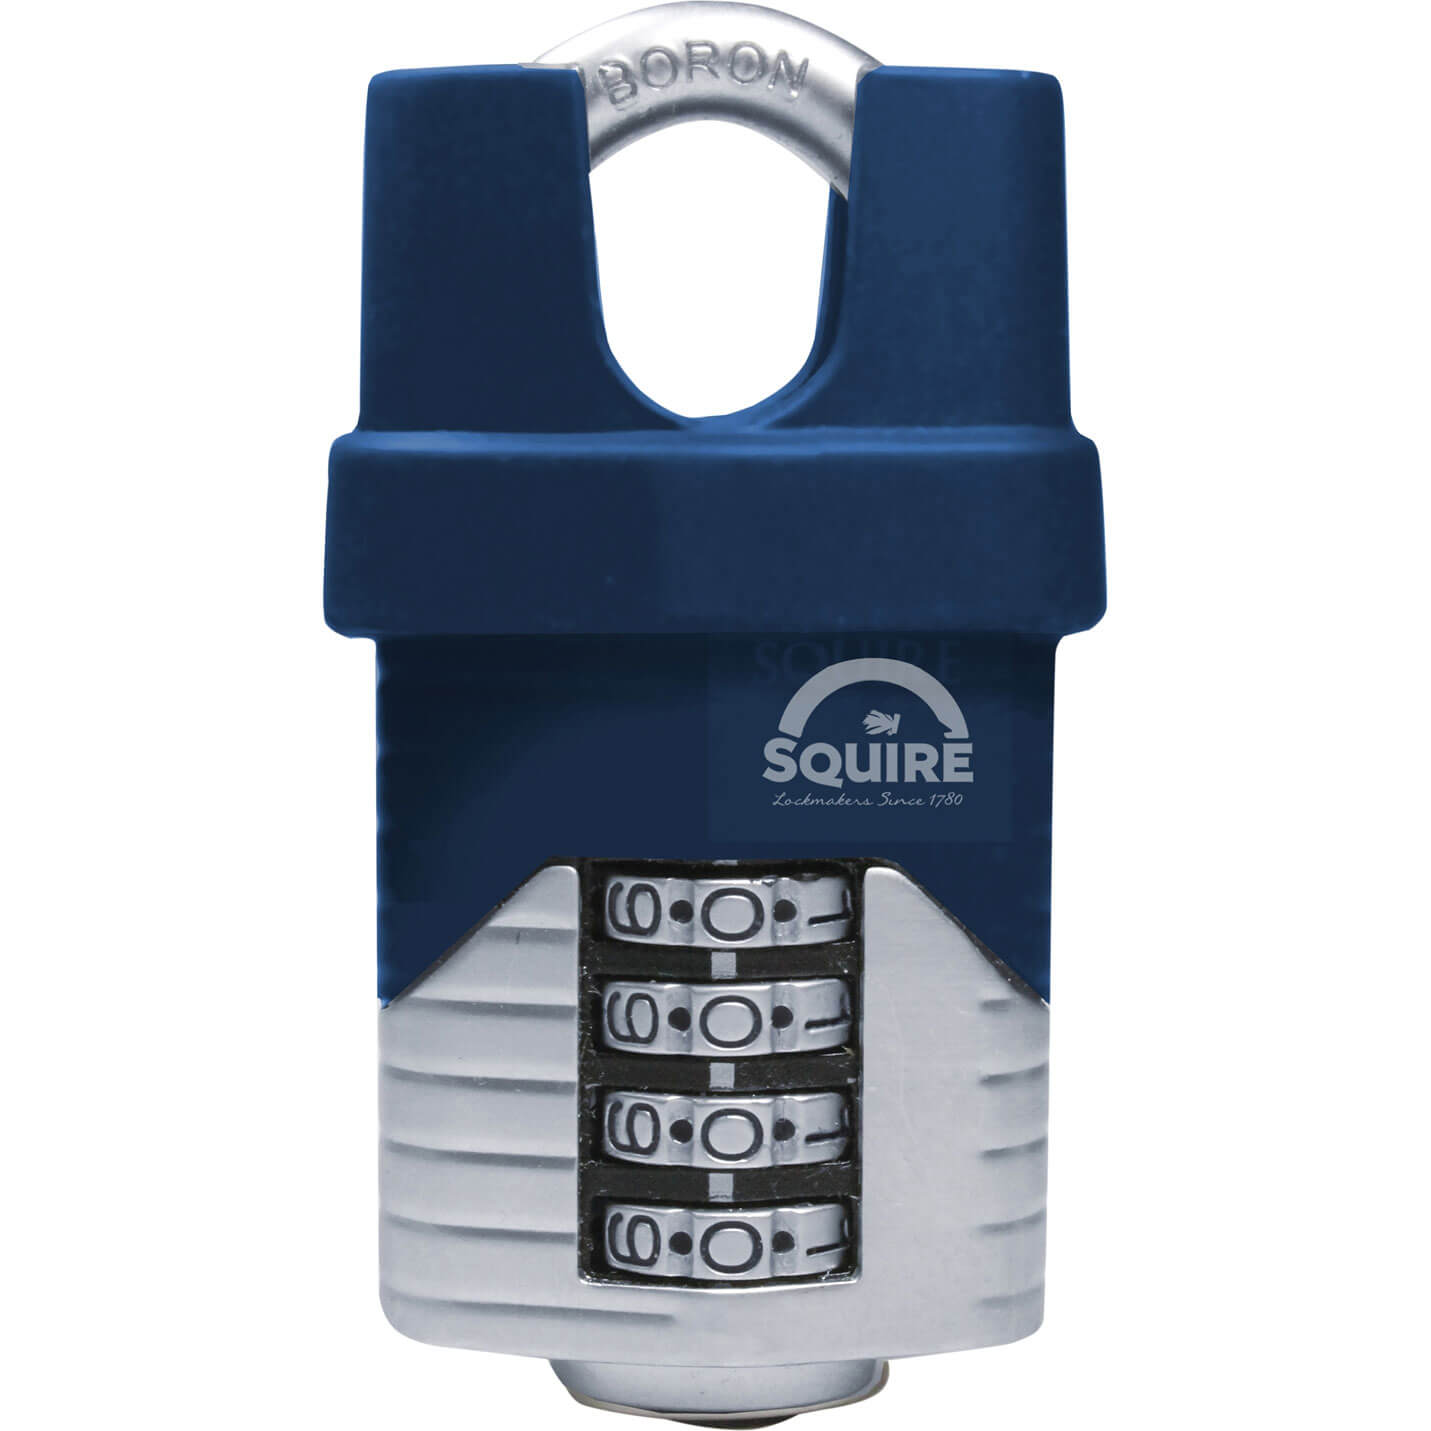 Henry Squire Vulcan Boron Shackle Combination Padlock 50mm Closed